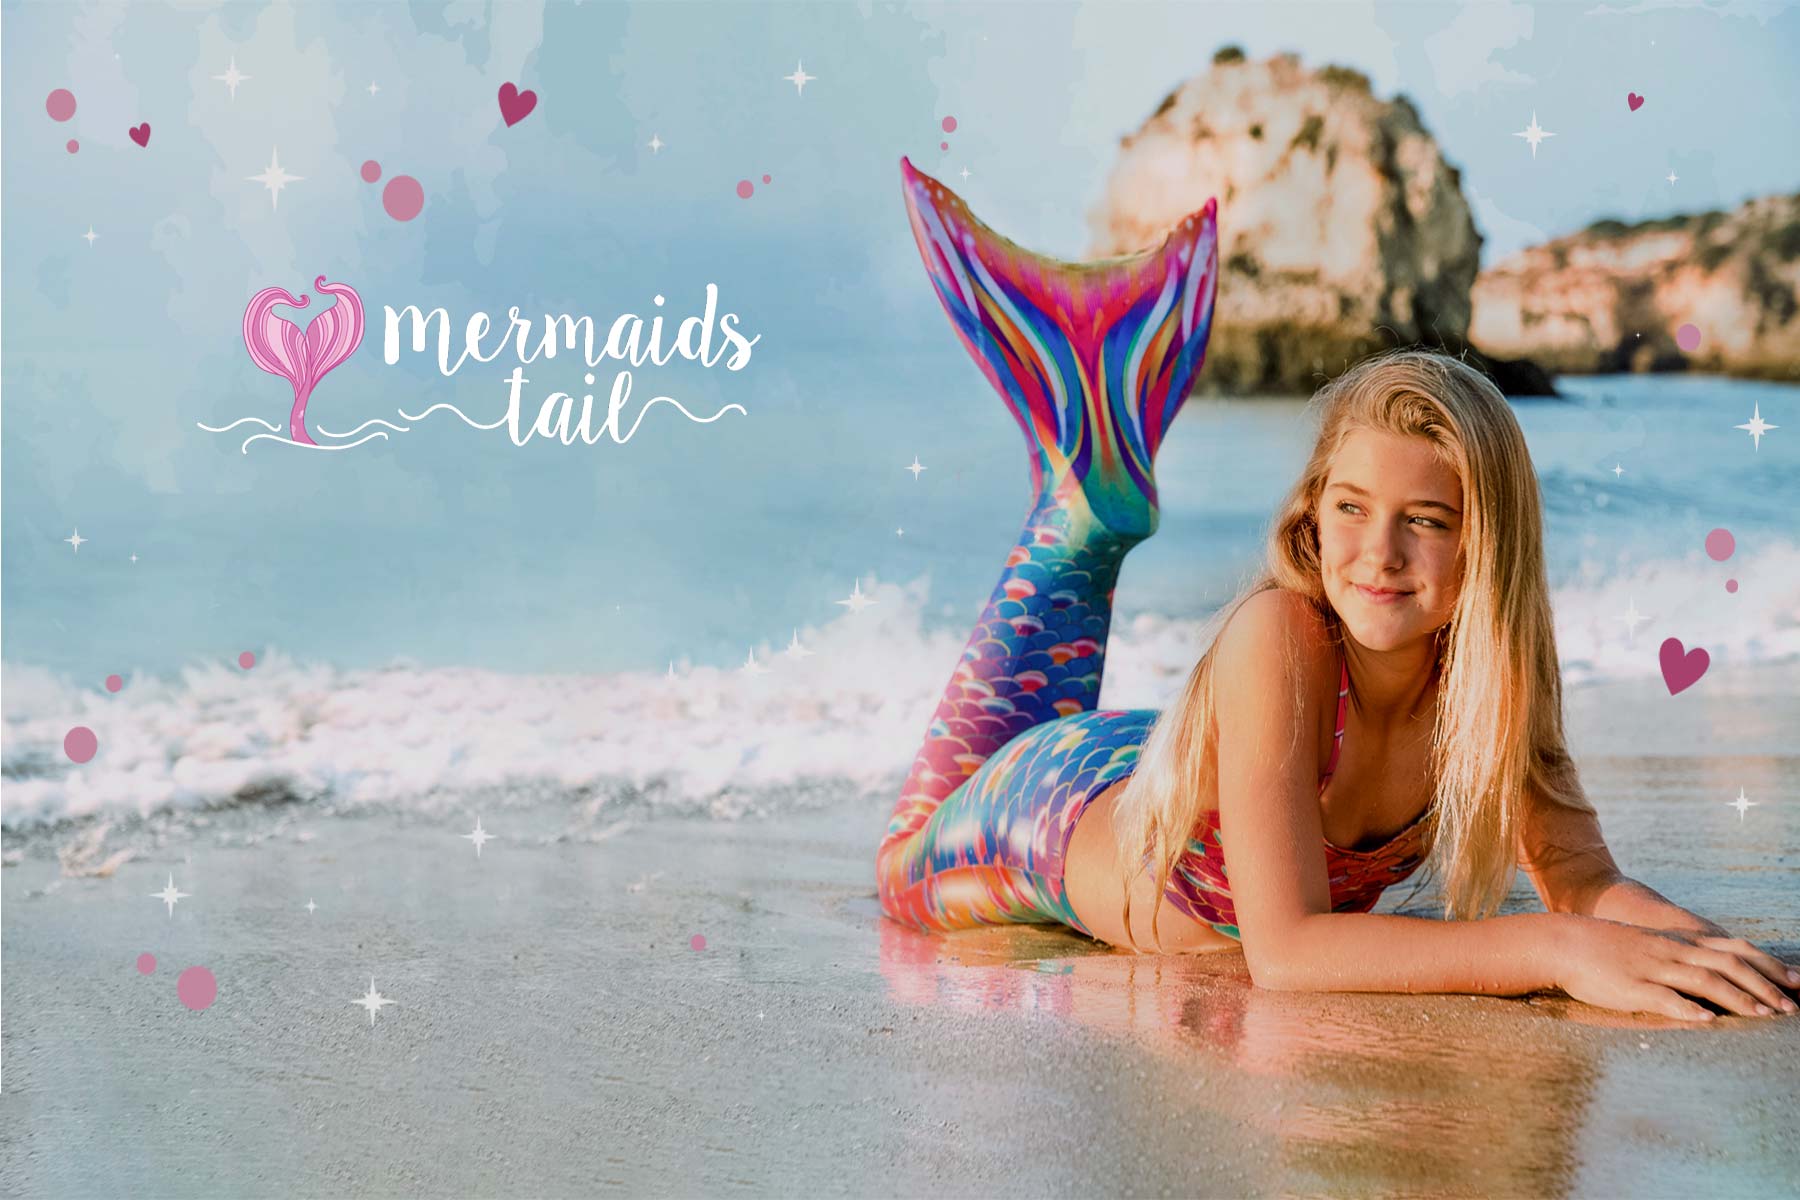 Two Oceans Mermaid Tails 🇿🇦 🧜🏼‍♀️ (@twooceansmermaidtails) • Instagram  photos and videos